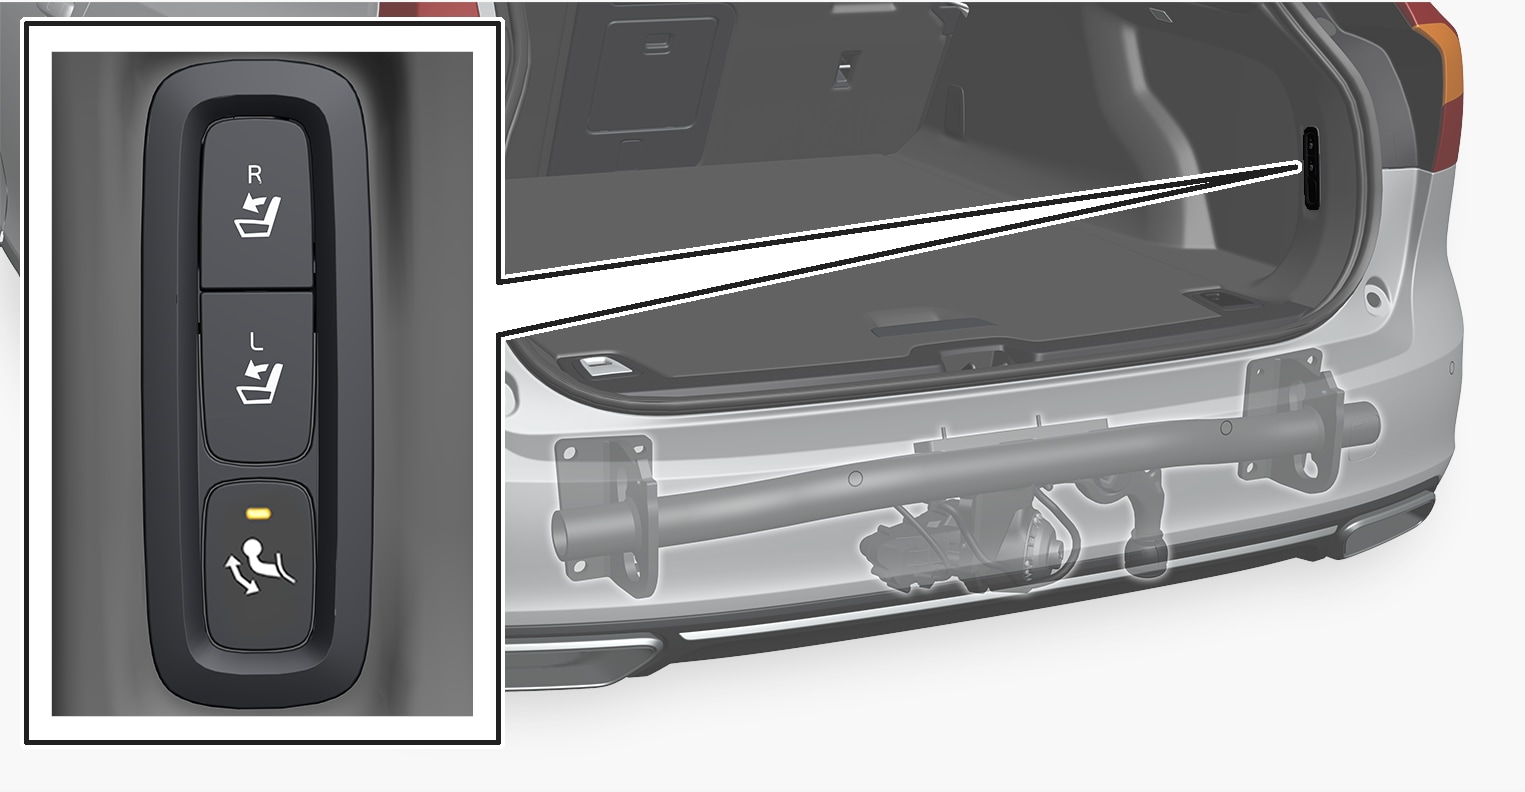 P5-1617-V90-Swivable towbar and switch foldout step1